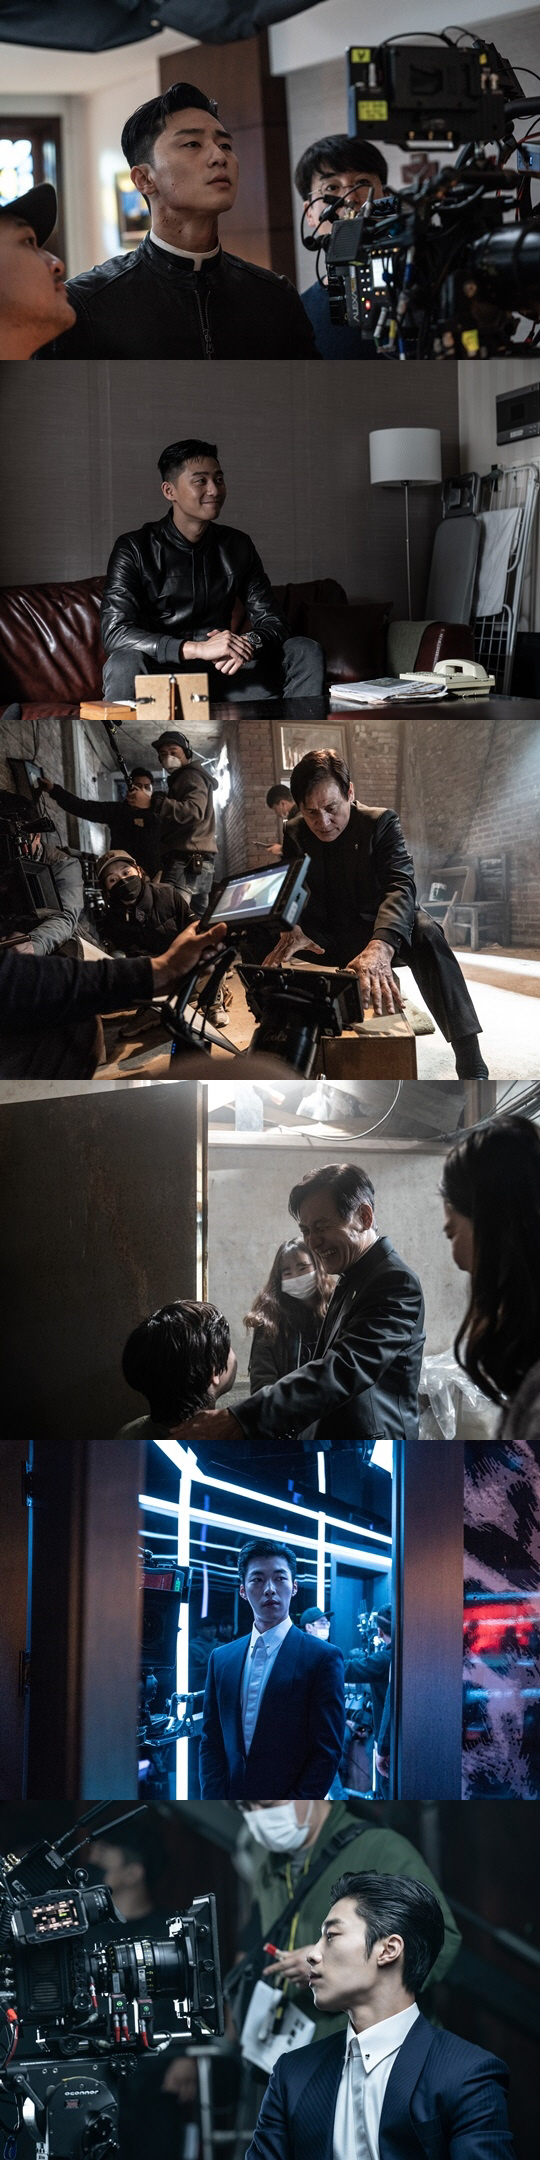 The anticipated movie Lion, which will capture the audience with its breathtaking development and fantasy-added intense action, unveiled the scene behind-the-scenes Steel Series, which gives a glimpse of the shooting scene full of passion and laughter.The Lion is a film about a fighting champion, Yonghu (Park Seo-joon), who meets the Kuma priest Ansinbu (Ahn Sung-ki) and confronts the powerful evil (), which has put the world in turmoil.Park Seo-joon, Ahn Sung-ki, Woo Do-hwan, and the combination of Korean national actor and young blood, the movie Lion, which attracts attention by revealing the scene behind the scene of the live shooting scene.The on-site behind-the-scenes SteelSeries focuses attention on the passionate actors and the warm-hearted scene atmosphere.SteelSeries, which is seriously monitored by Park Seo-joon, a martial arts champion who faces evil, raises expectations for an intense character transformation that will be shown through lion in a different shape in a priests uniform.Park Seo-joon, who does not lose his smile even after shooting, captures his attention with a bright look different from the character in the movie.The Steel Series of Ahn Sung-ki, a Kuma priest who chases evil, predicts a heavy presence in the movie with a perfect synchro rate with the Safety, from the charismatic figure who is seriously immersed in acting to the soft charm of smiling brightly with the child actor.Woo Do-hwans SteelSeries, a black bishop who spreads evil to the world, gathers anticipation for a new evil character that has never been seen with a mysterious charm that overwhelms the viewer.The lion, which raises expectations for the movie by releasing the scene behind the scenes that crosses seriousness and warmth, will heat up the theater this summer.The most anticipated Lion in 2019, which is a combination of fresh stories and new materials surrounding powerful evil, differentiated action and attractive actors, is scheduled to open on July 31st.